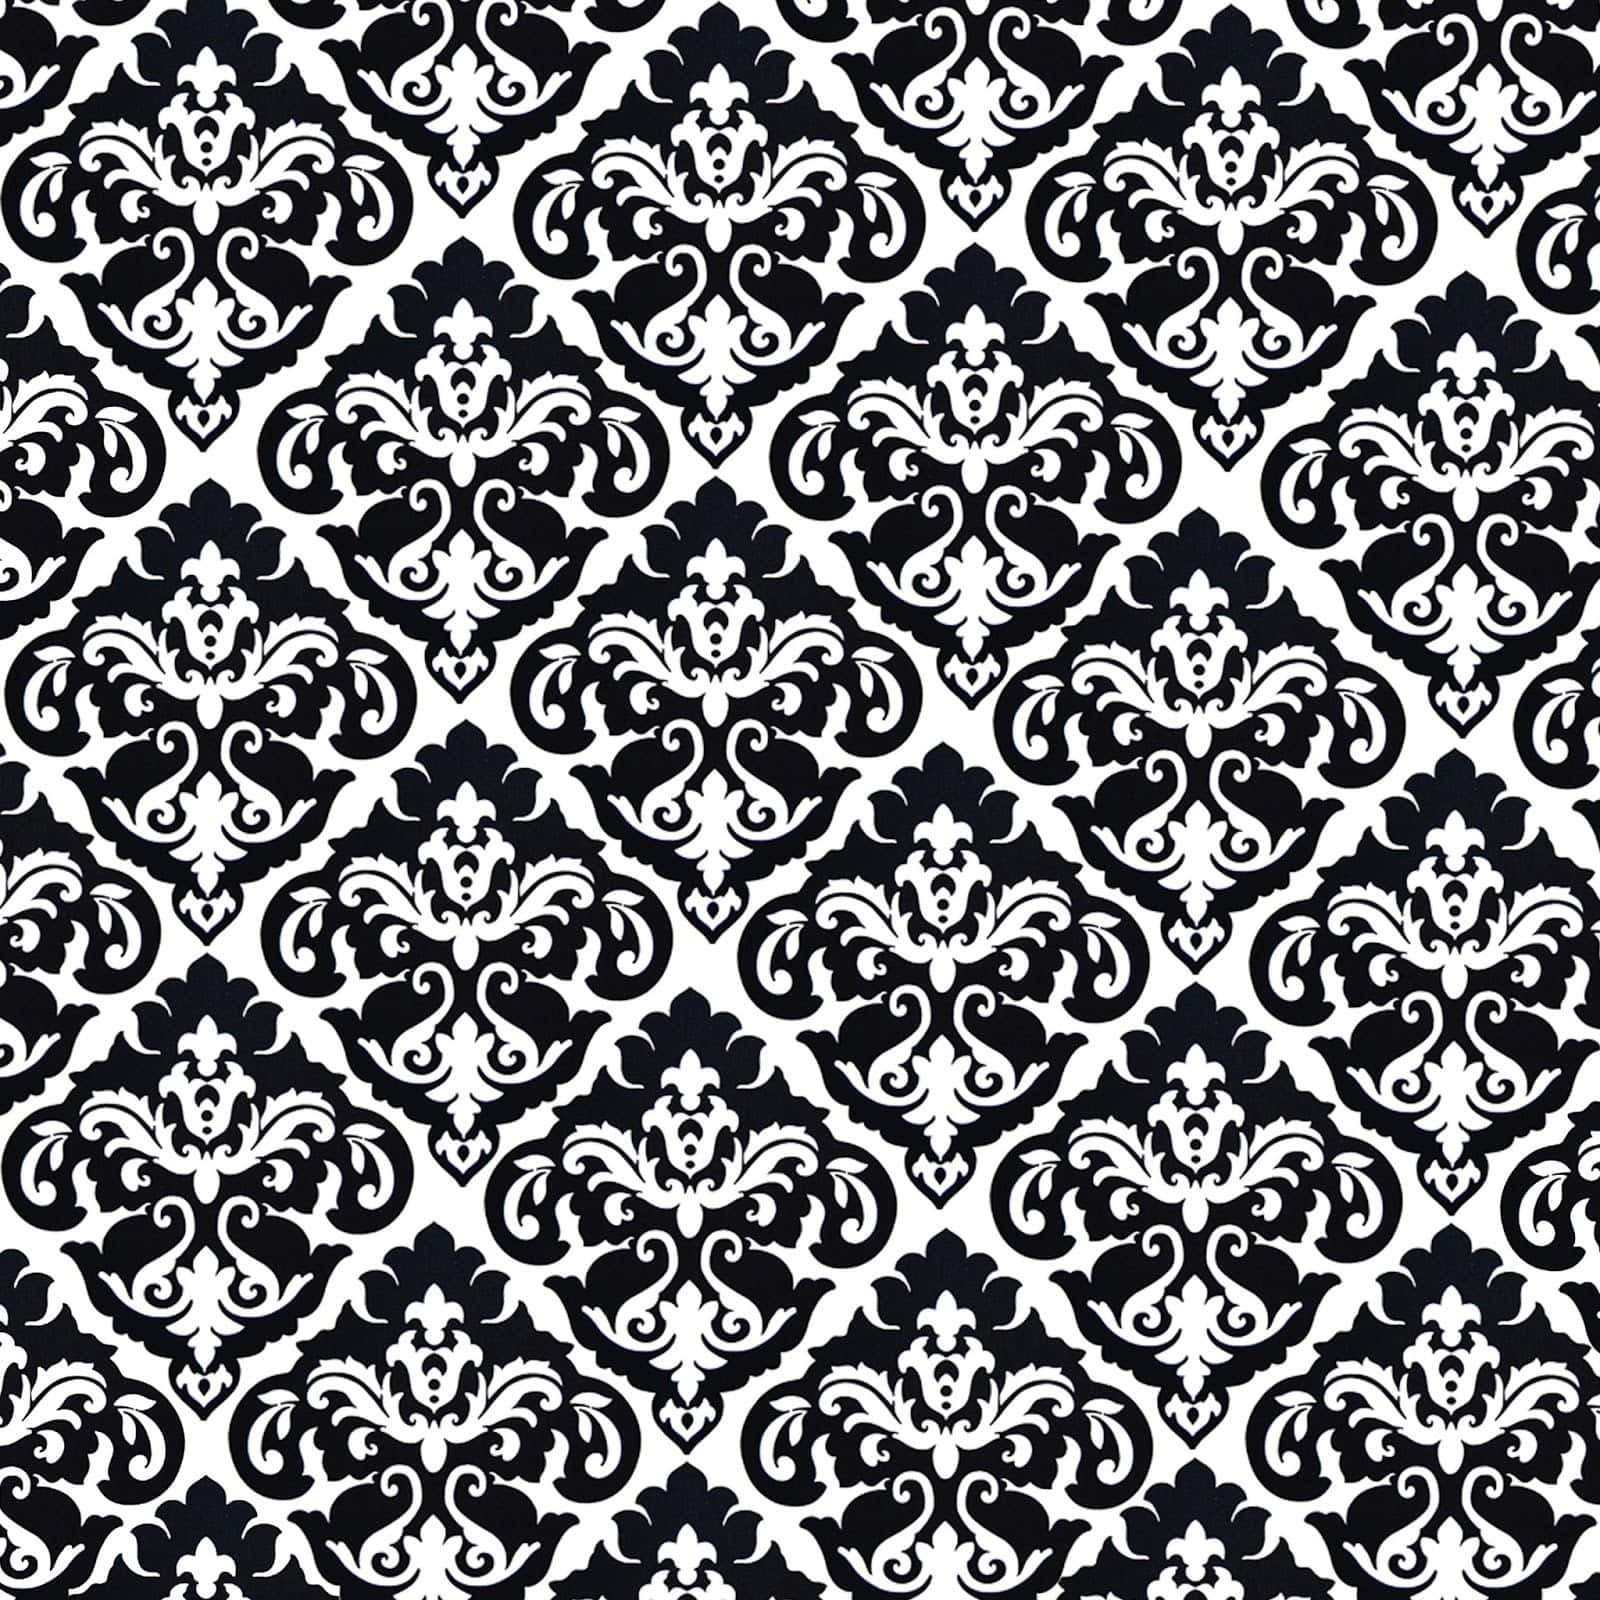 Beautifully Crafted Black and White Pattern Wallpaper